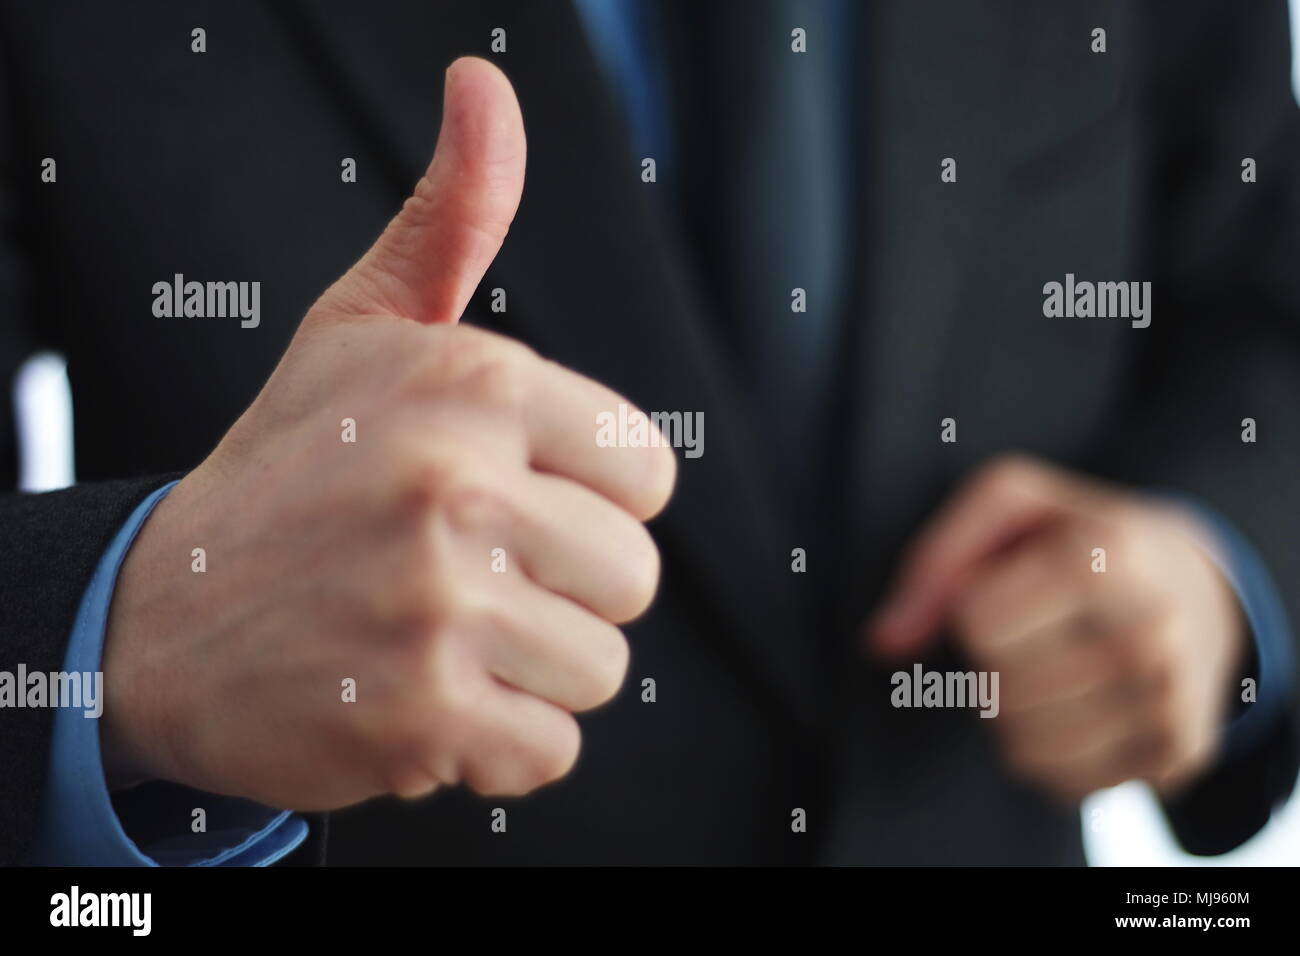 Giving thumbs up sign Stock Photo